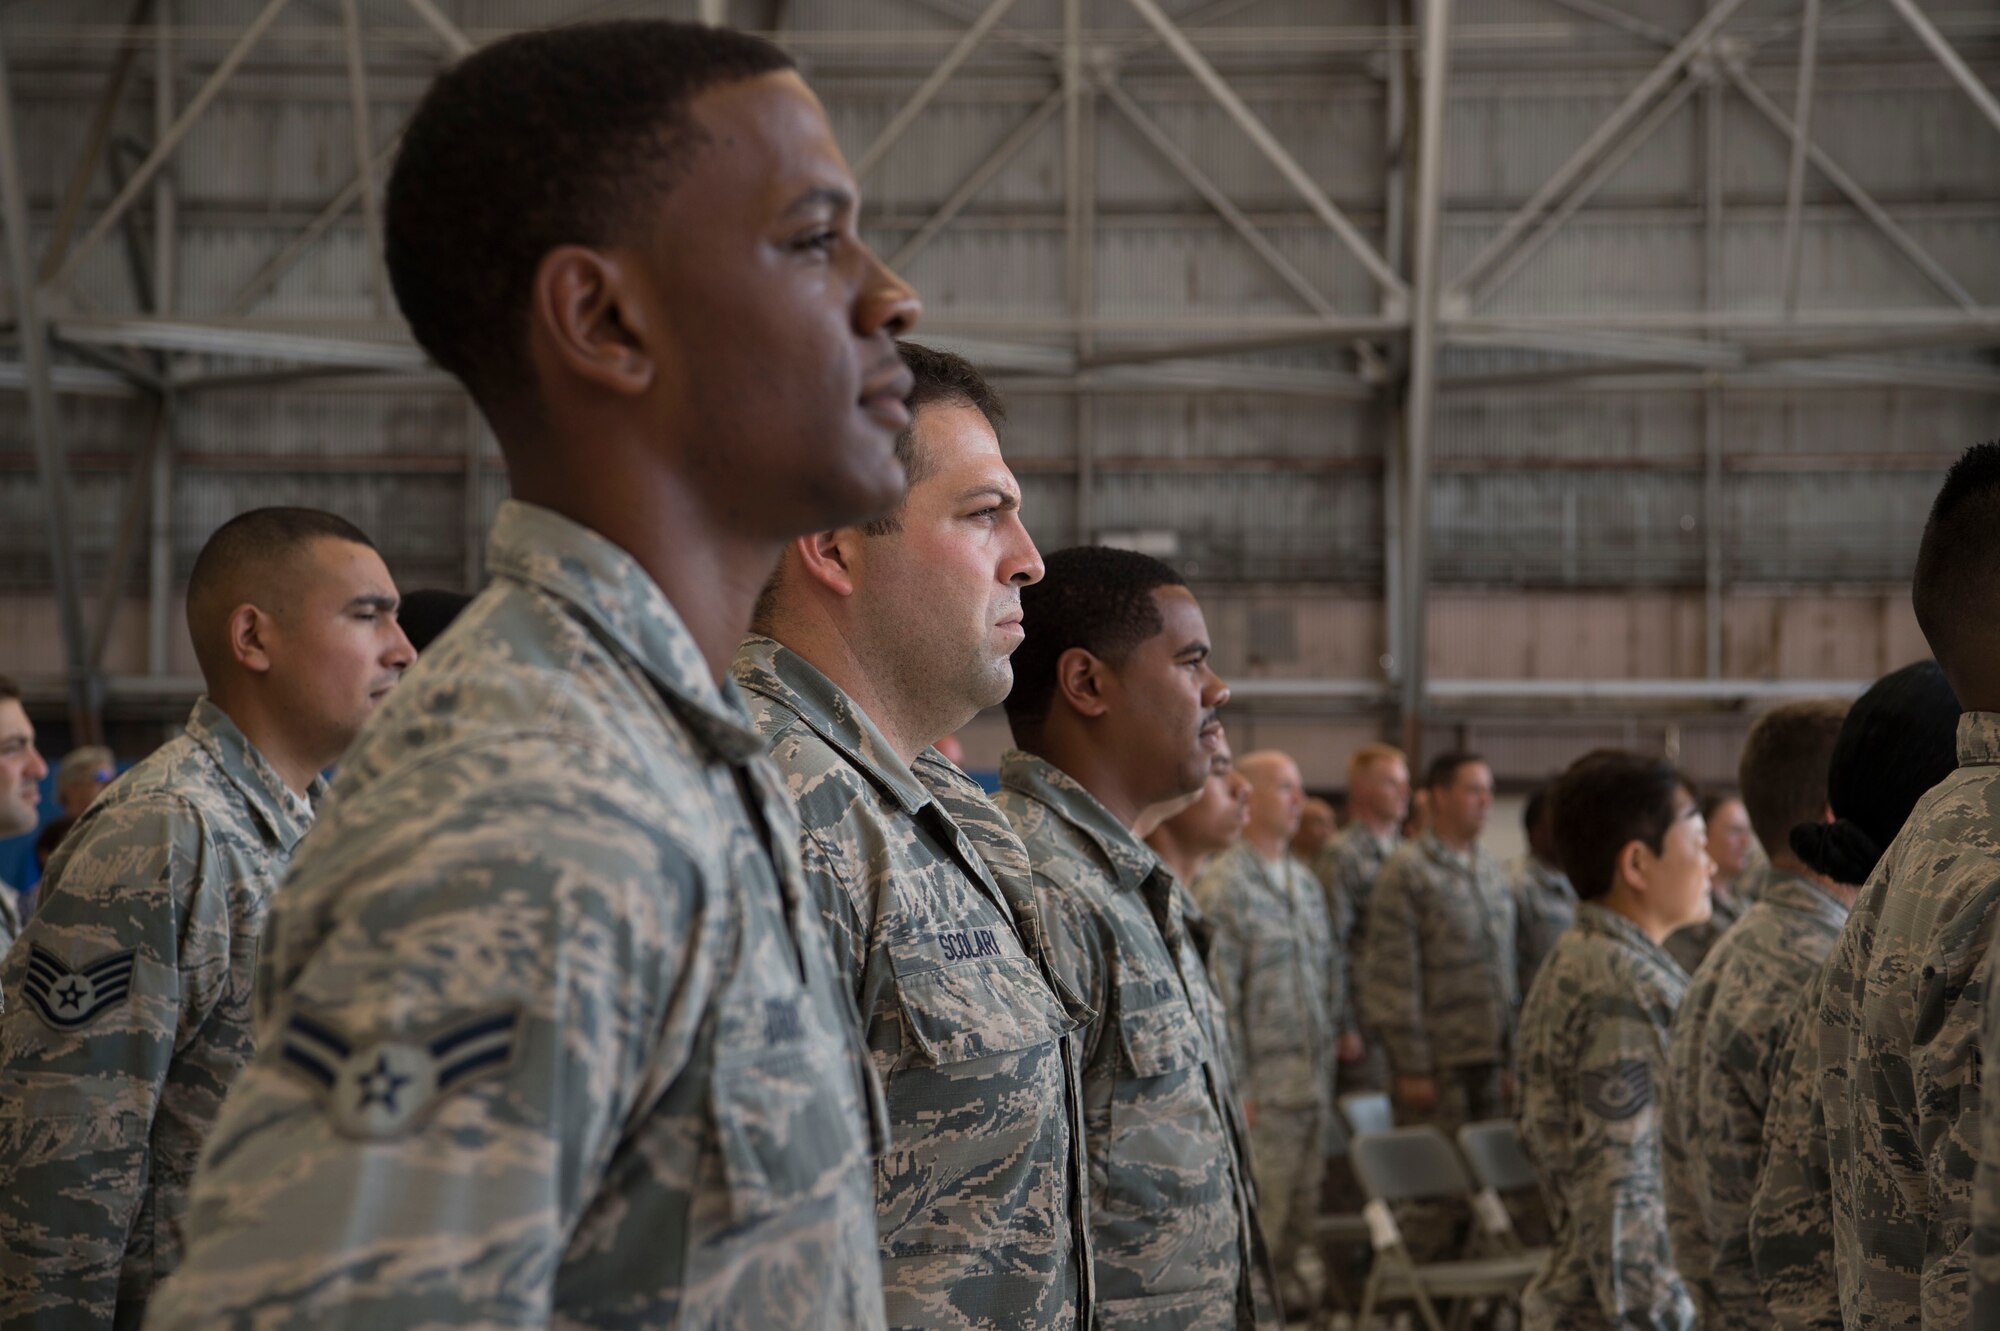 Airmen from the 15th Maintenance Group stand in formation during the MXG change of command ceremony, Joint Base Pearl Harbor-Hickam, Hawaii, July 16, 2018. The MXG supports 31 home station aircraft to meet global airlift, global strike and theater security mission requirements and provides support to over 7,200 joint and allied aircraft transiting through Hickam Field each year. (U.S. Air Force photo by Tech. Sgt. Heather Redman)